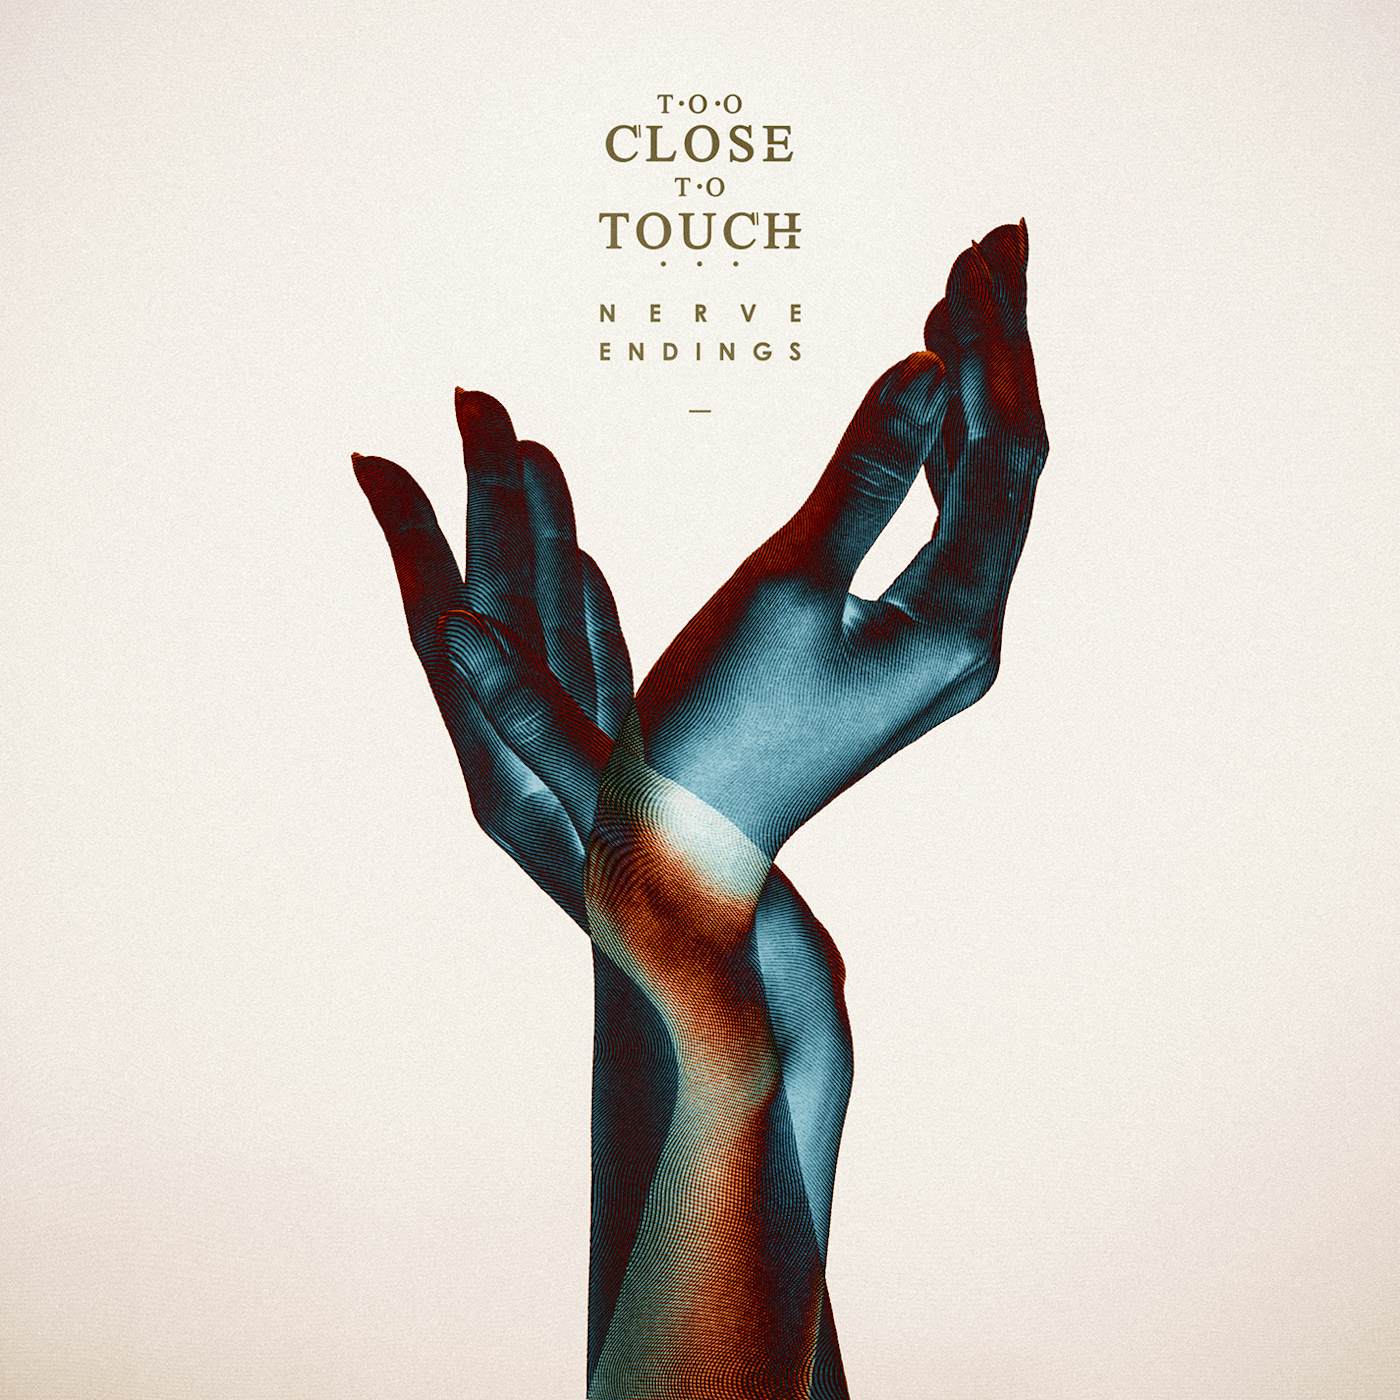 Too Close To Touch NERVE ENDINGS CD